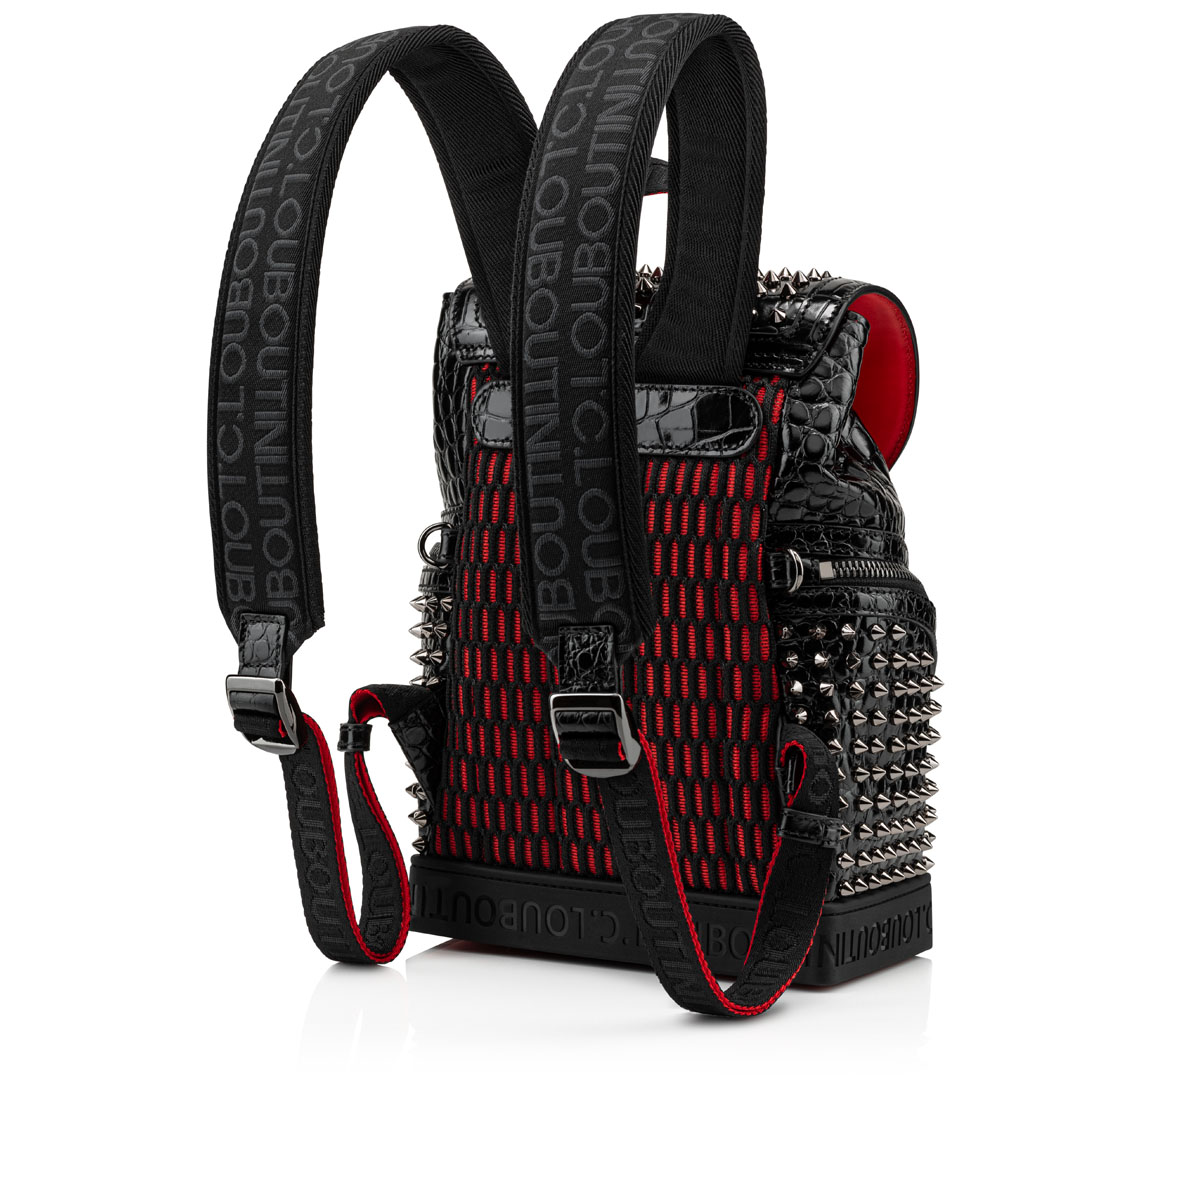 Explorafunk small - Backpack - Alligator embossed calf leather and spikes -  Black - Christian Louboutin